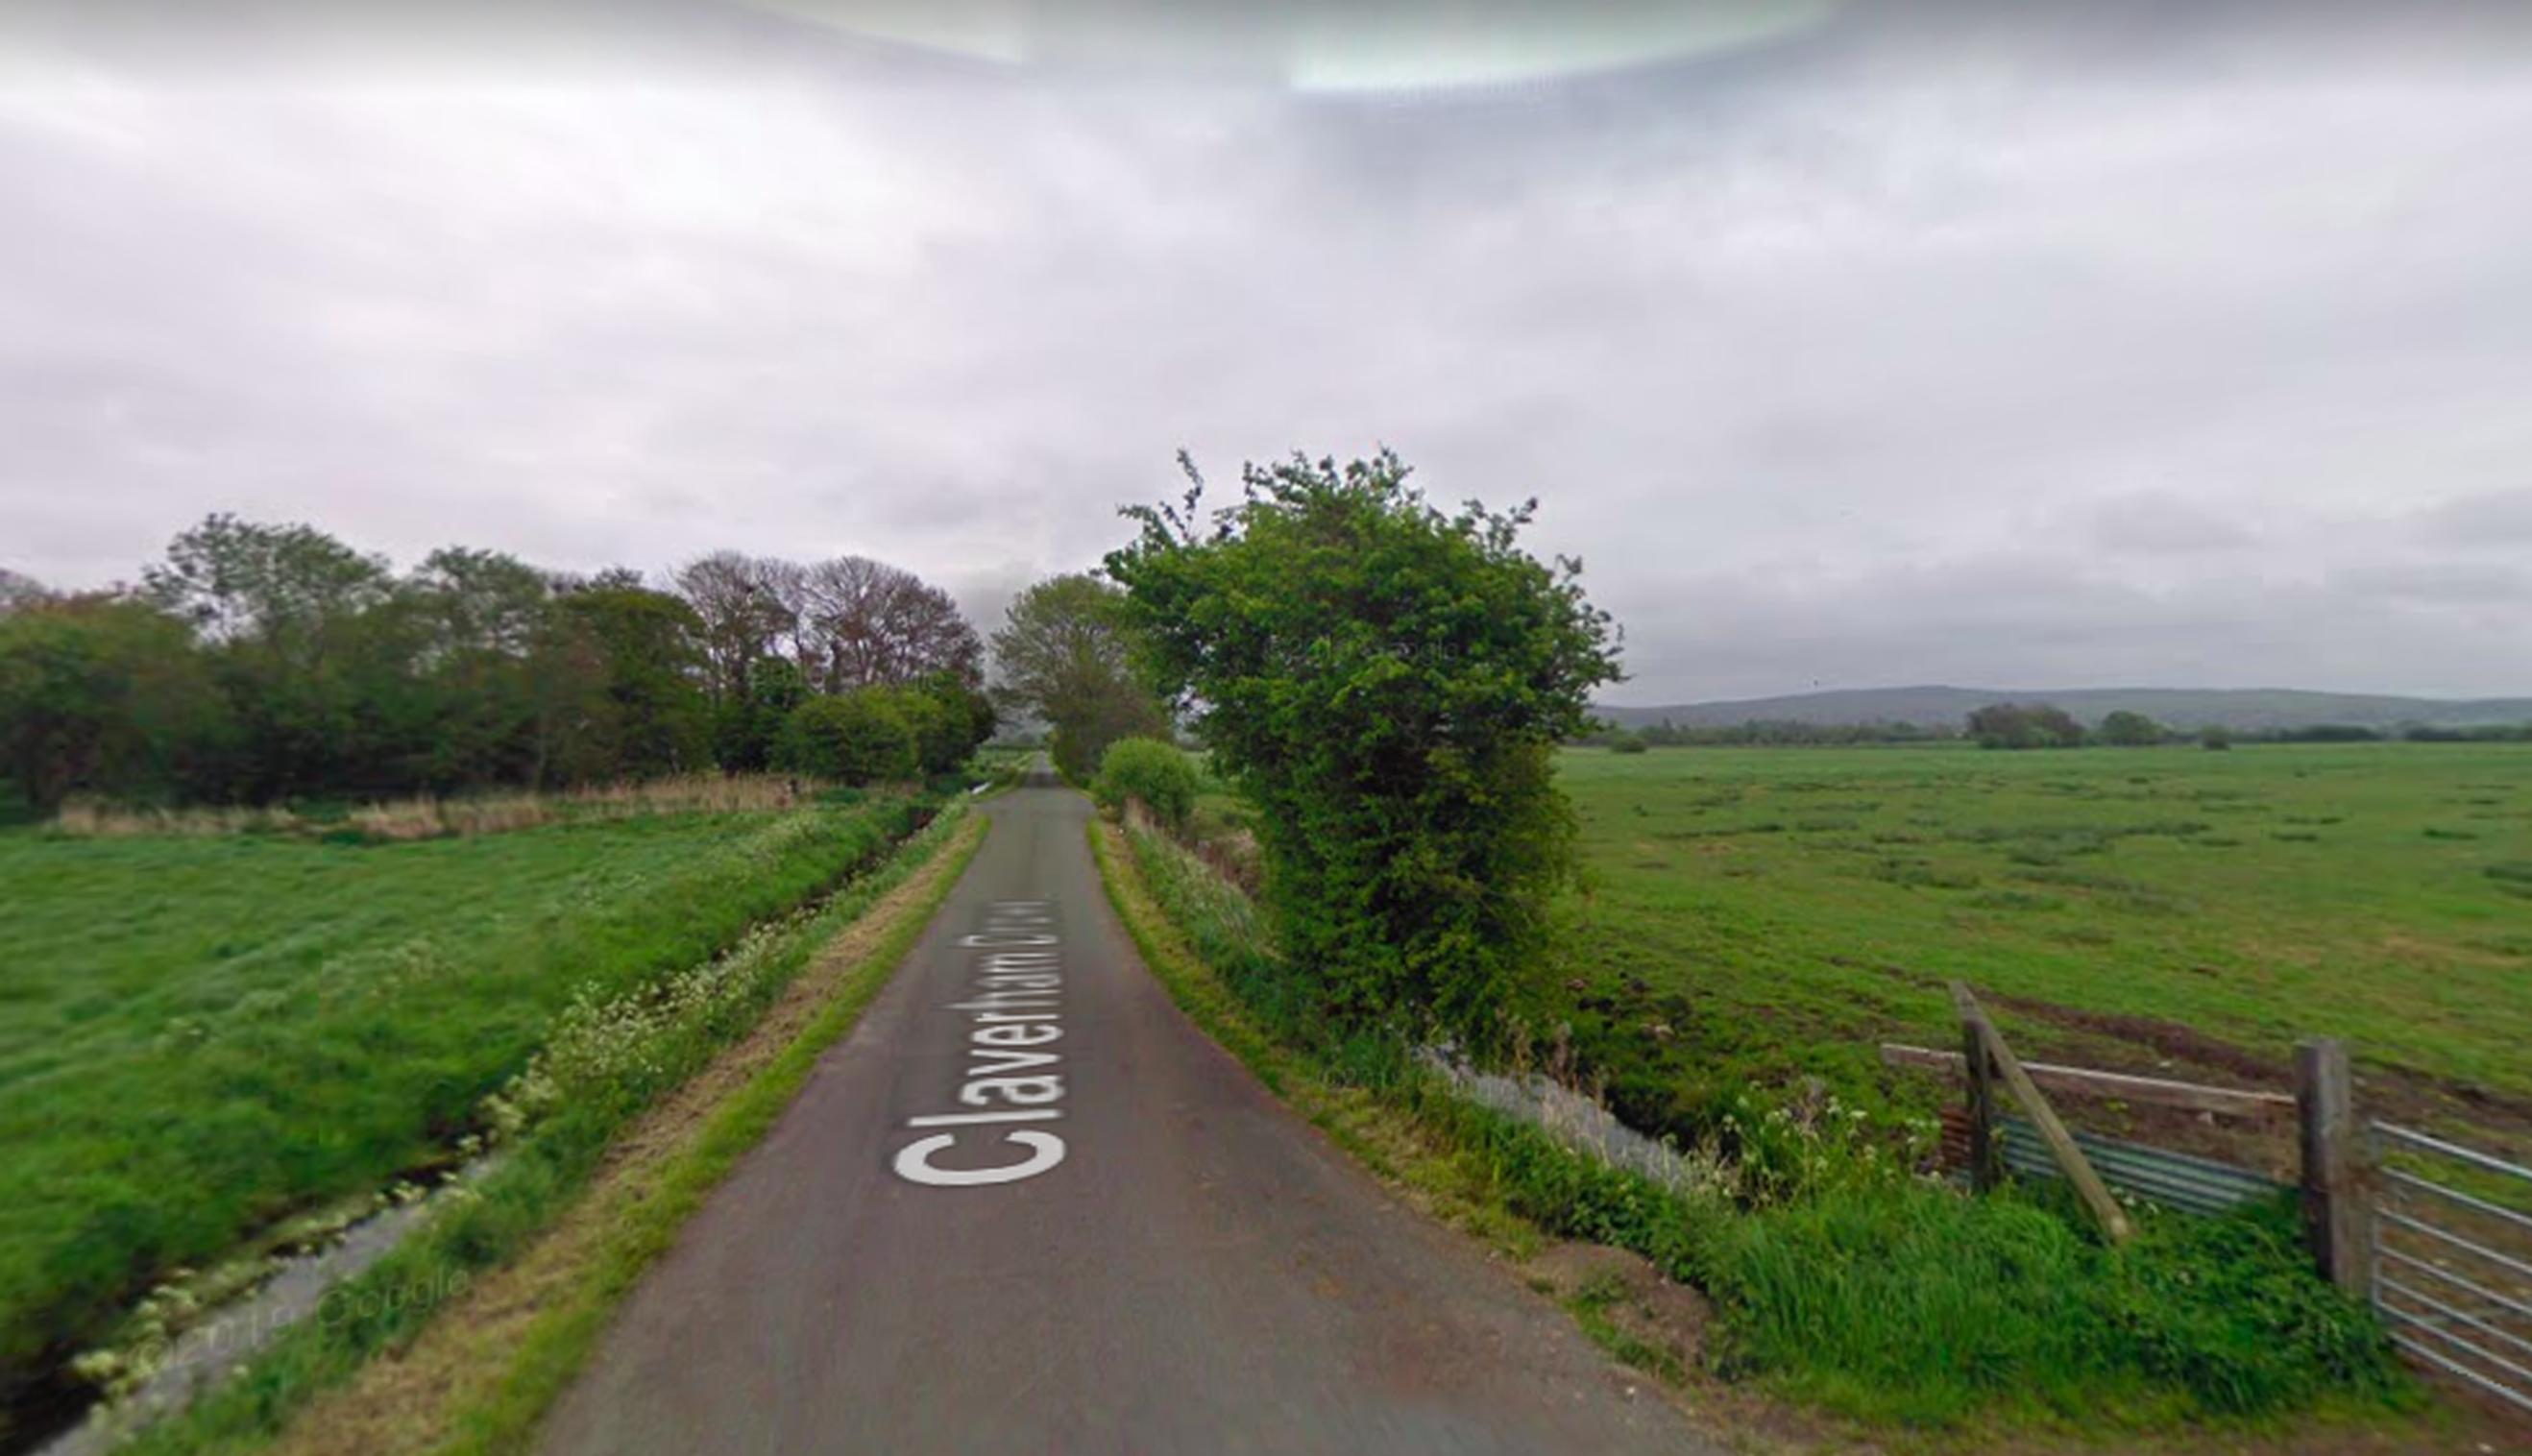 Claverham Drove: one of the roads on which through traffic would have been banned